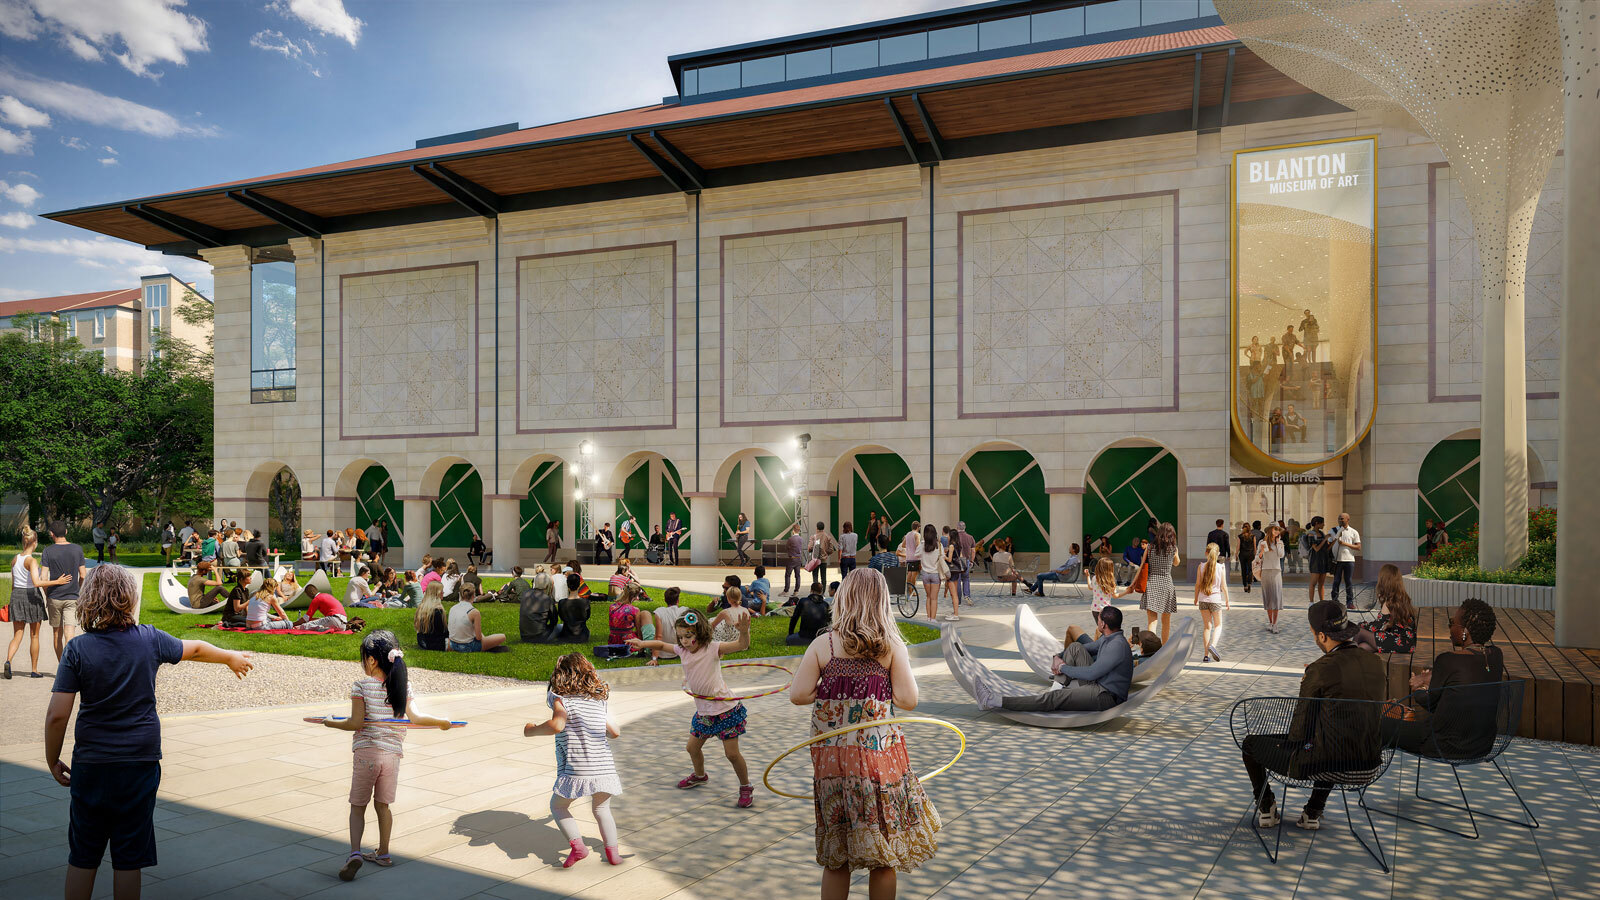 A rendering of a building facade with people across the central plaza.